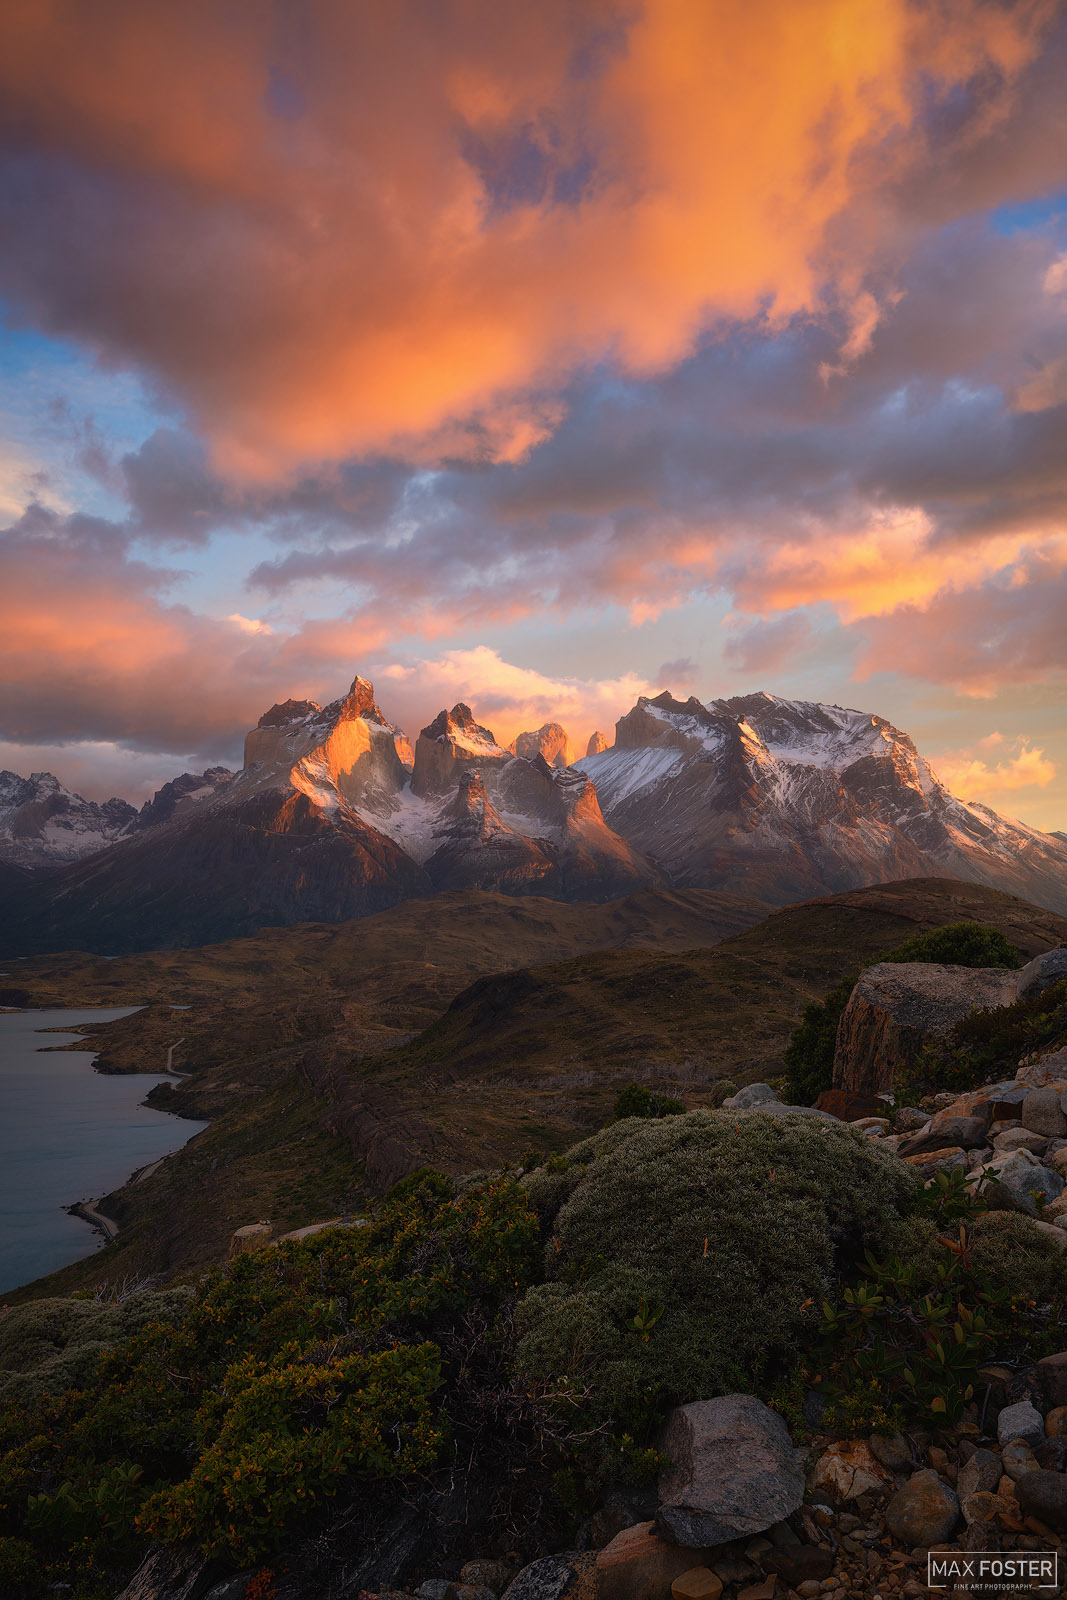 Adorn your walls with Exquisite Wonder, Max Foster's limited edition photographic print of Los Cuernos in Torres Del Paine, Chile...